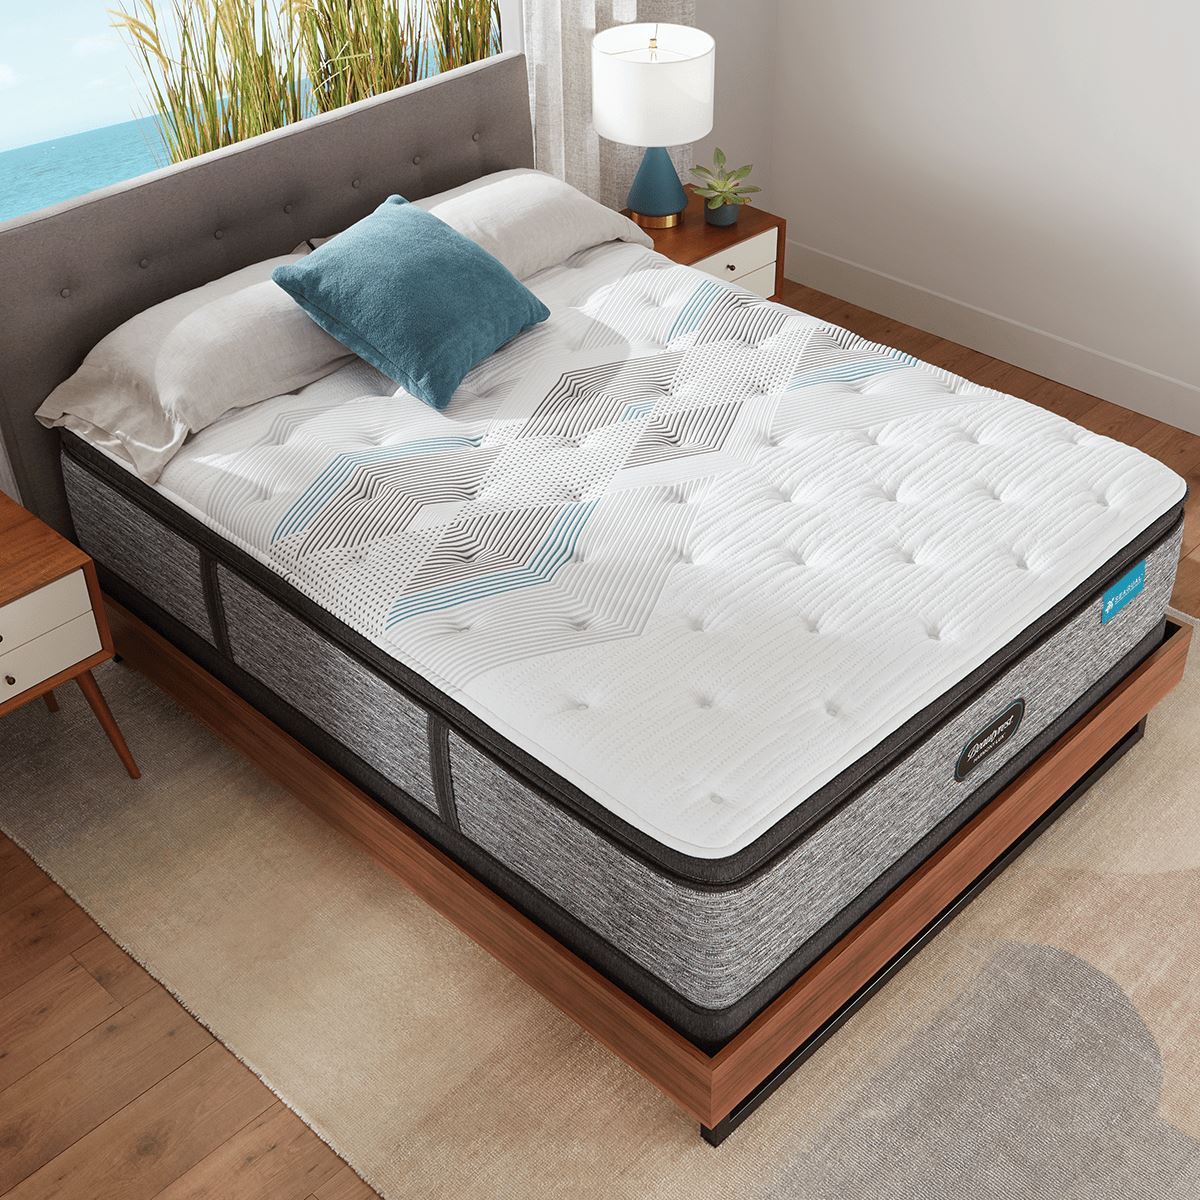 Beautyrest Harmony Lux Carbon Plush Pillowtop Mattress In Bedroom Overhead